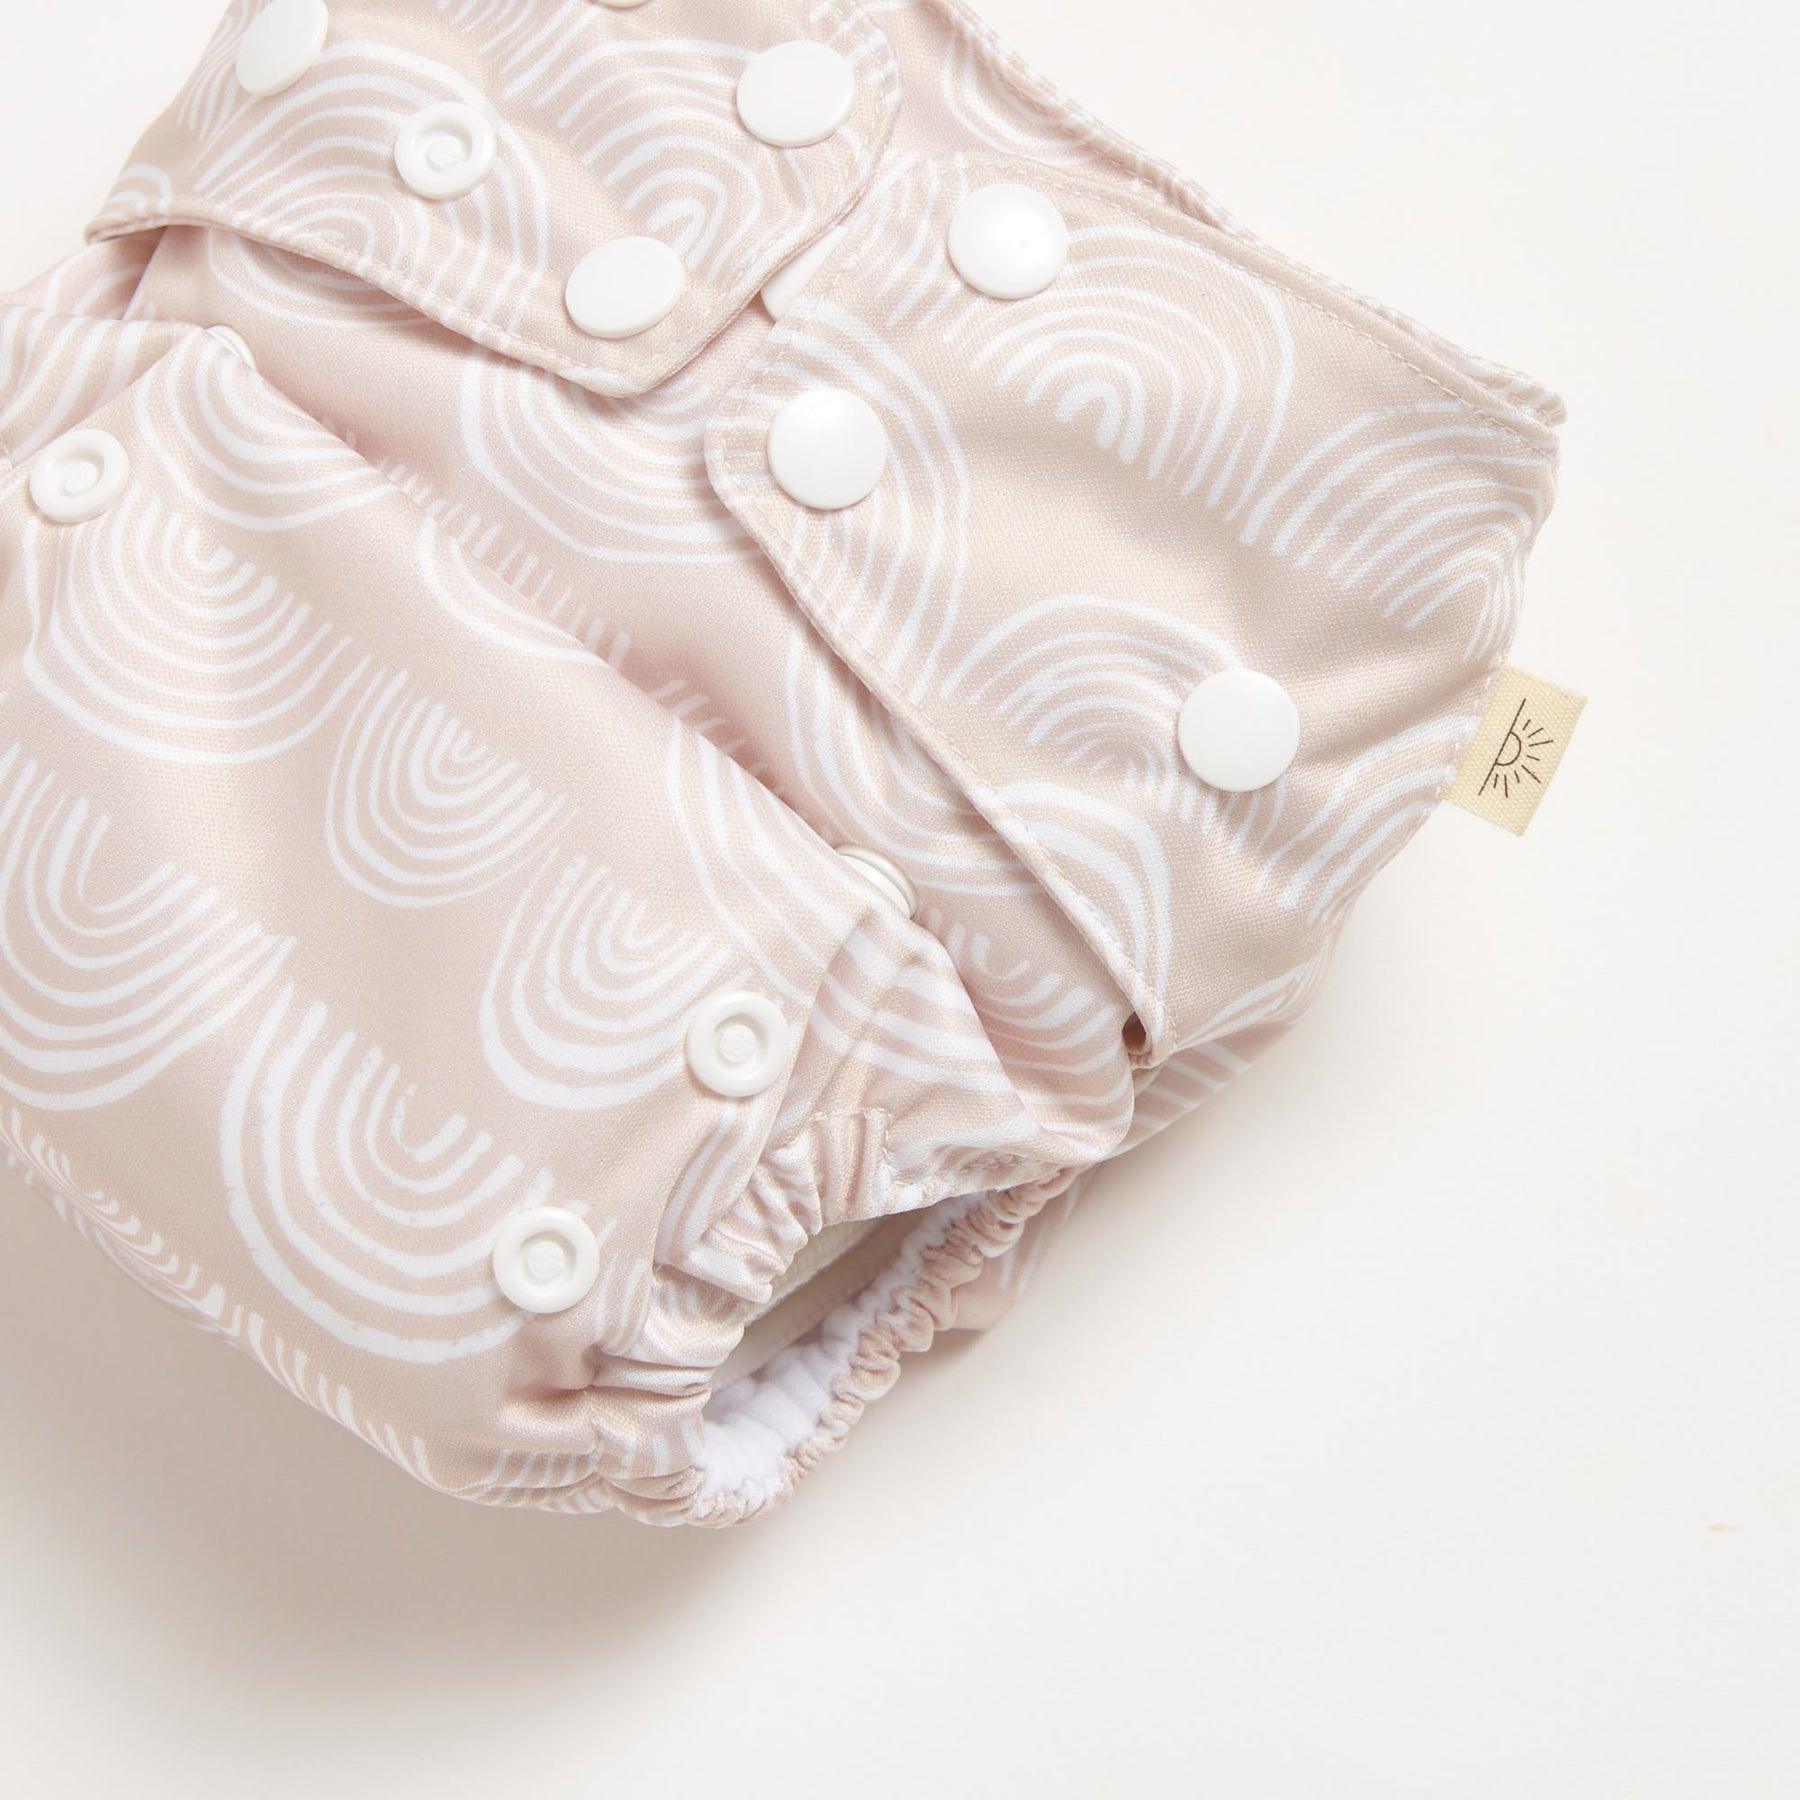 Reusable Modern Cloth Nappy | Rainbow Dreaming - THE SUS&TAIN STORE